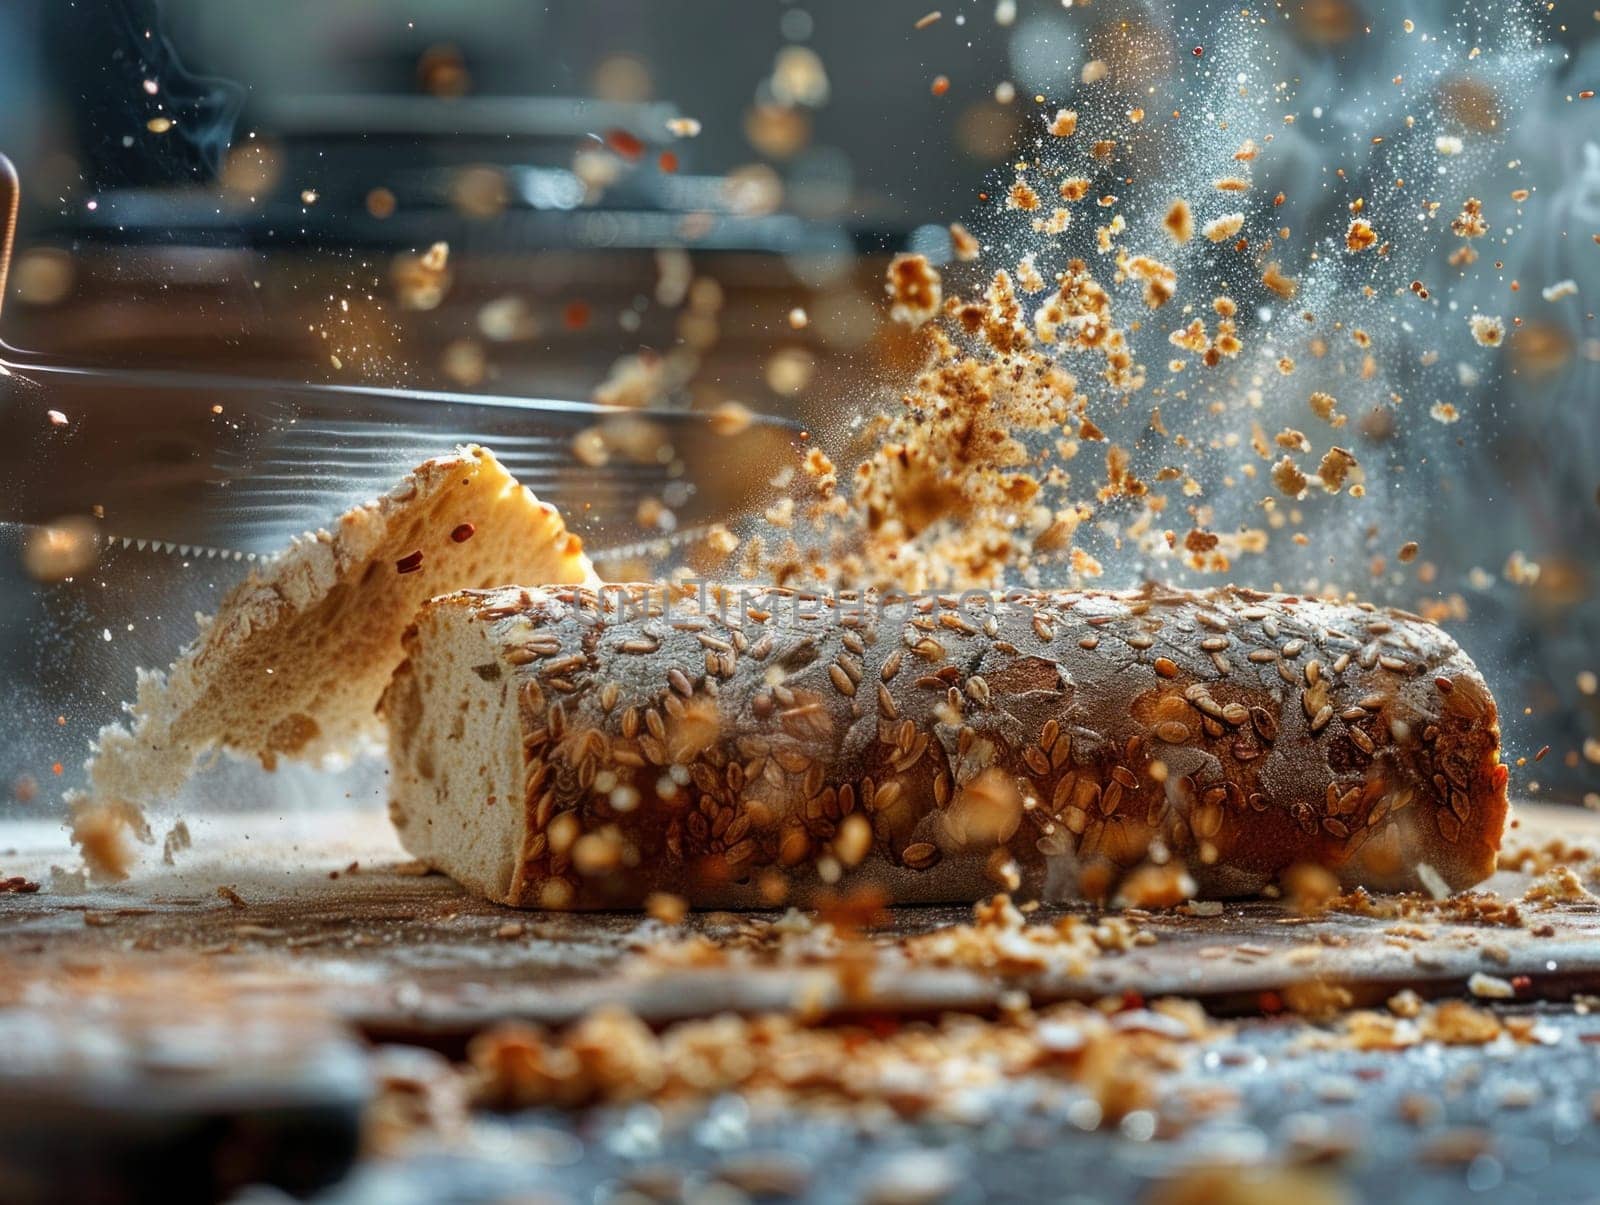 Slicing Loaf of Bread With Knife by but_photo